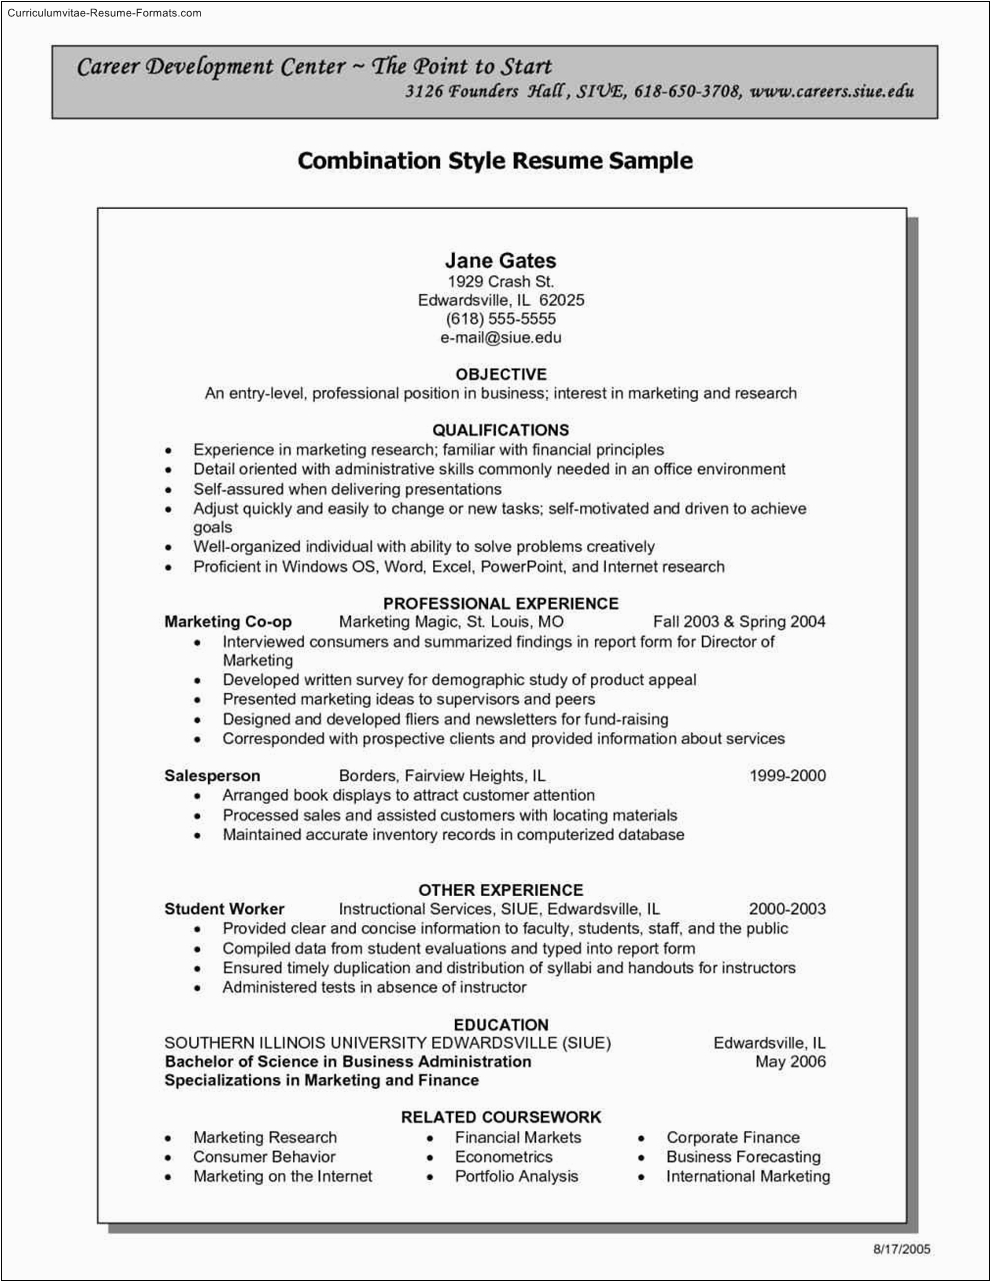 Sample for A Combination Resume for It Free Bination Resume Templates